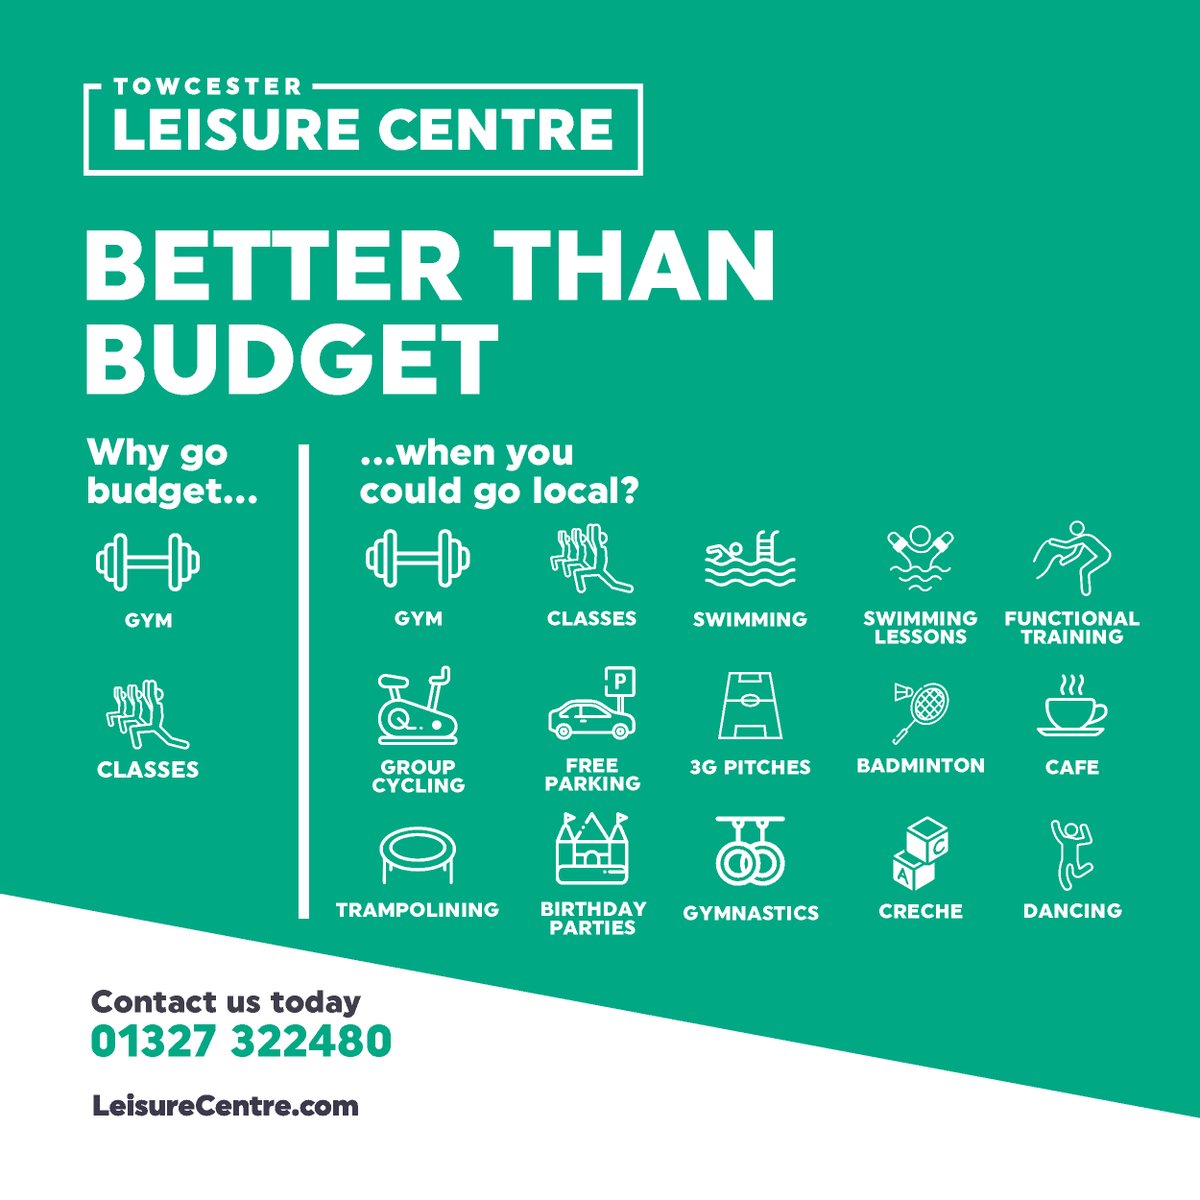 Weighing up your options? Here are just a few reasons why we are 'Better than Budget'! If you haven't been to the centre before but would like to come for a look around, please let us know and we can arrange this with one of our membership advisors. Call us on 01327 322480